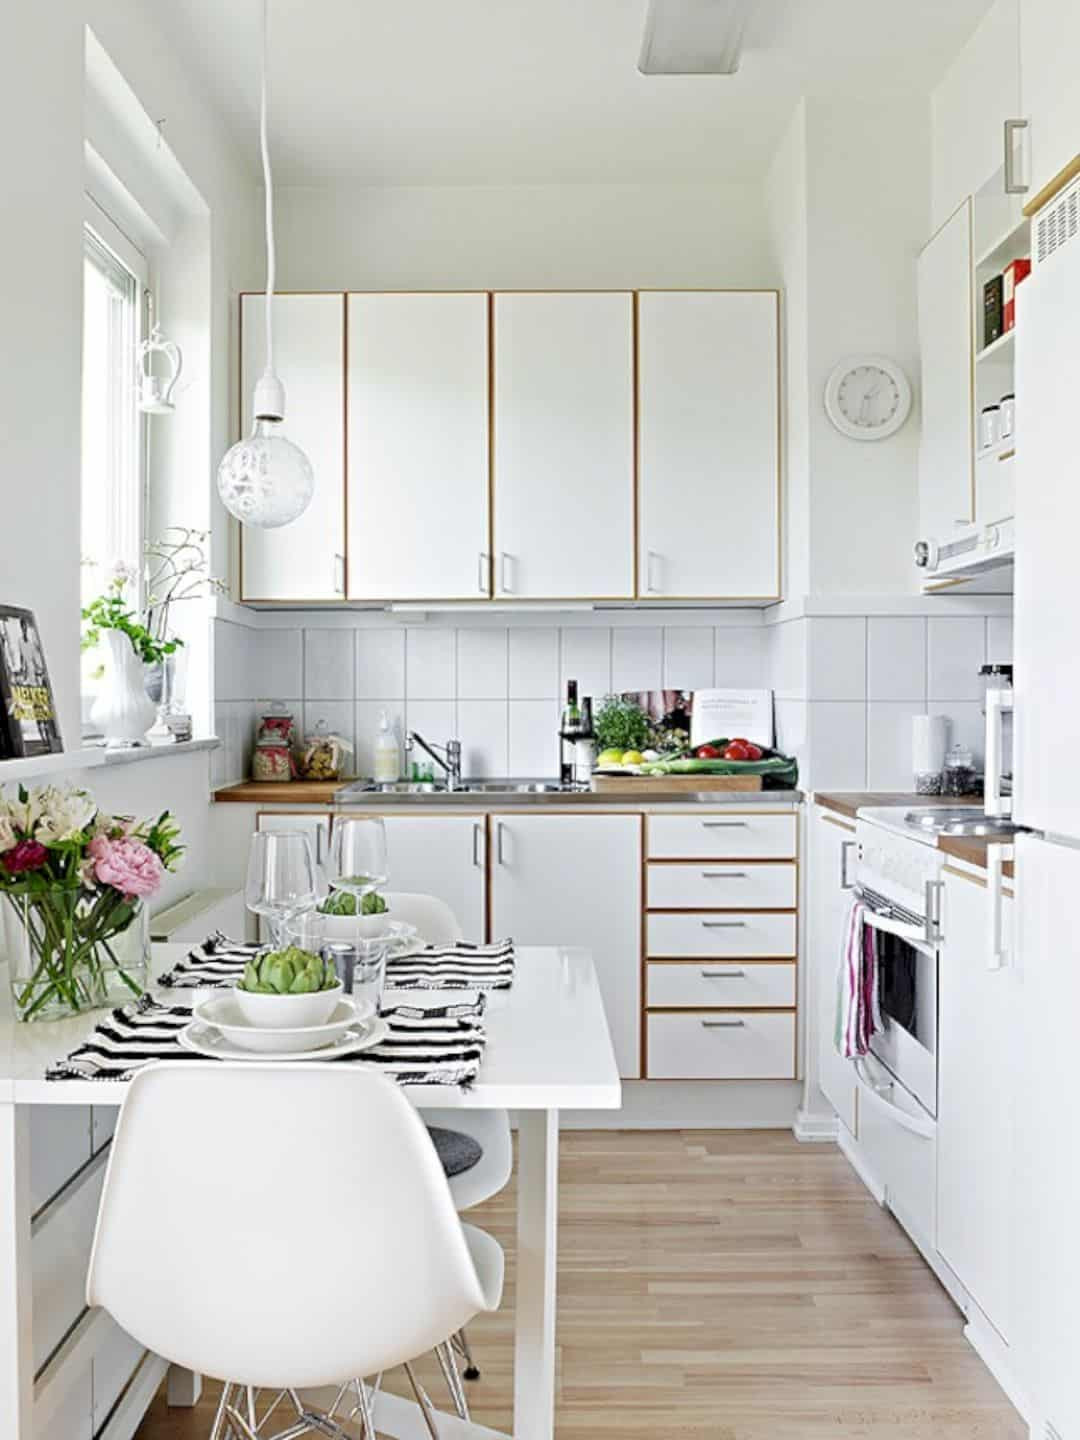 Small Kitchen Space Ideas
 146 Amazing Small Kitchen Ideas that Perfect for Your Tiny